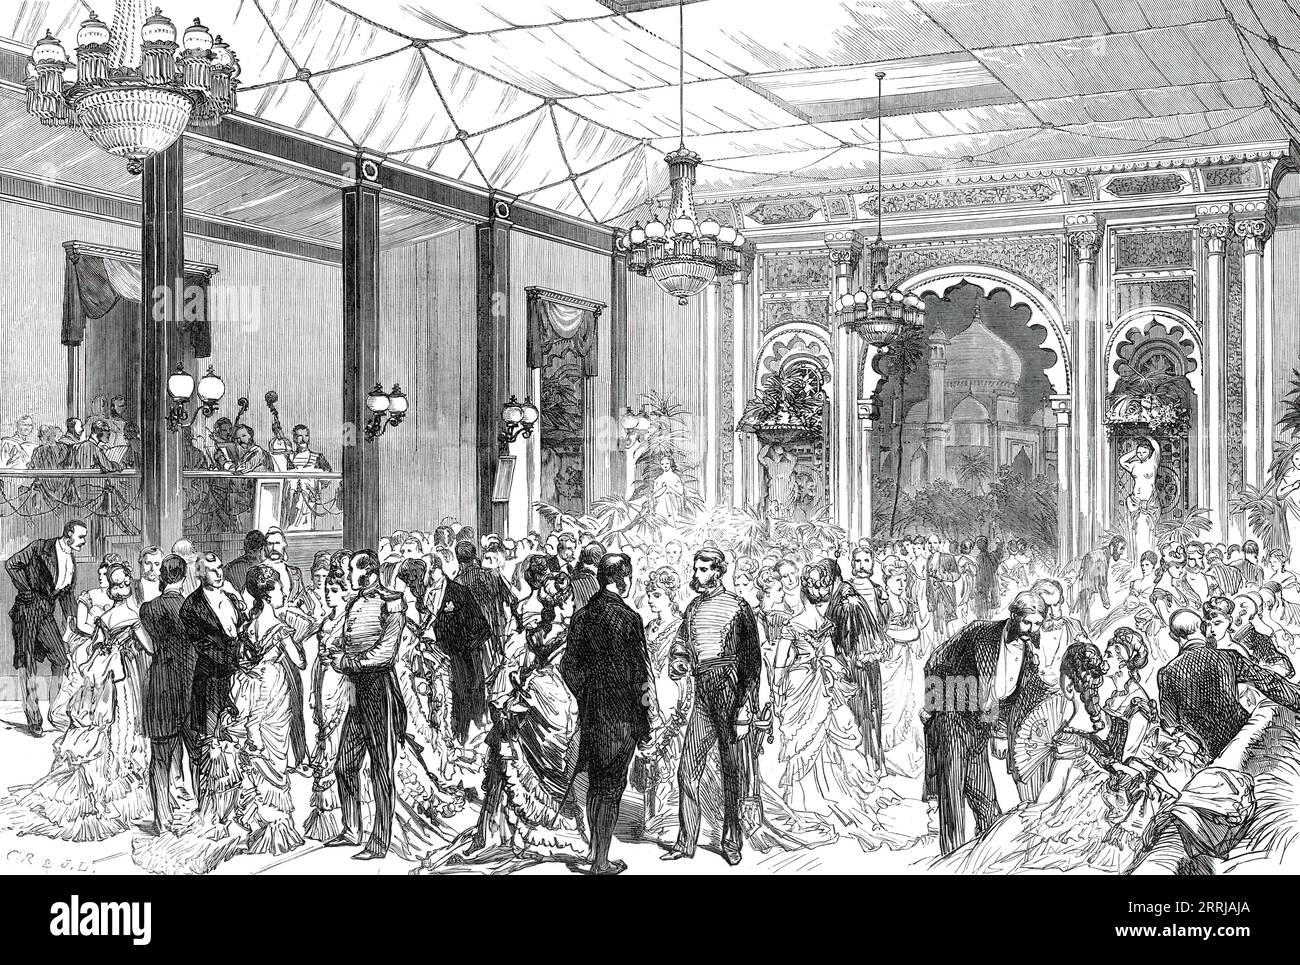 The Royal Visit to the City: the Indian Ball-Room at the Guildhall, 1876. Temporary ballroom '...destined for a new council-chamber...This magnificent apartment,...is ceiled with a combination of white and crimson cloth, and is hung throughout with rich light blue satin, bays being formed by columns covered with velvet of darker shade enriched by gilt cornices and mouldings. In each bay there is a noble mirror, beneath a tasteful canopy, with side brackets for lights; but the main illumination is supplied by glass chandeliers suspended from the centre line of the roof. At the end of this Royal Stock Photo